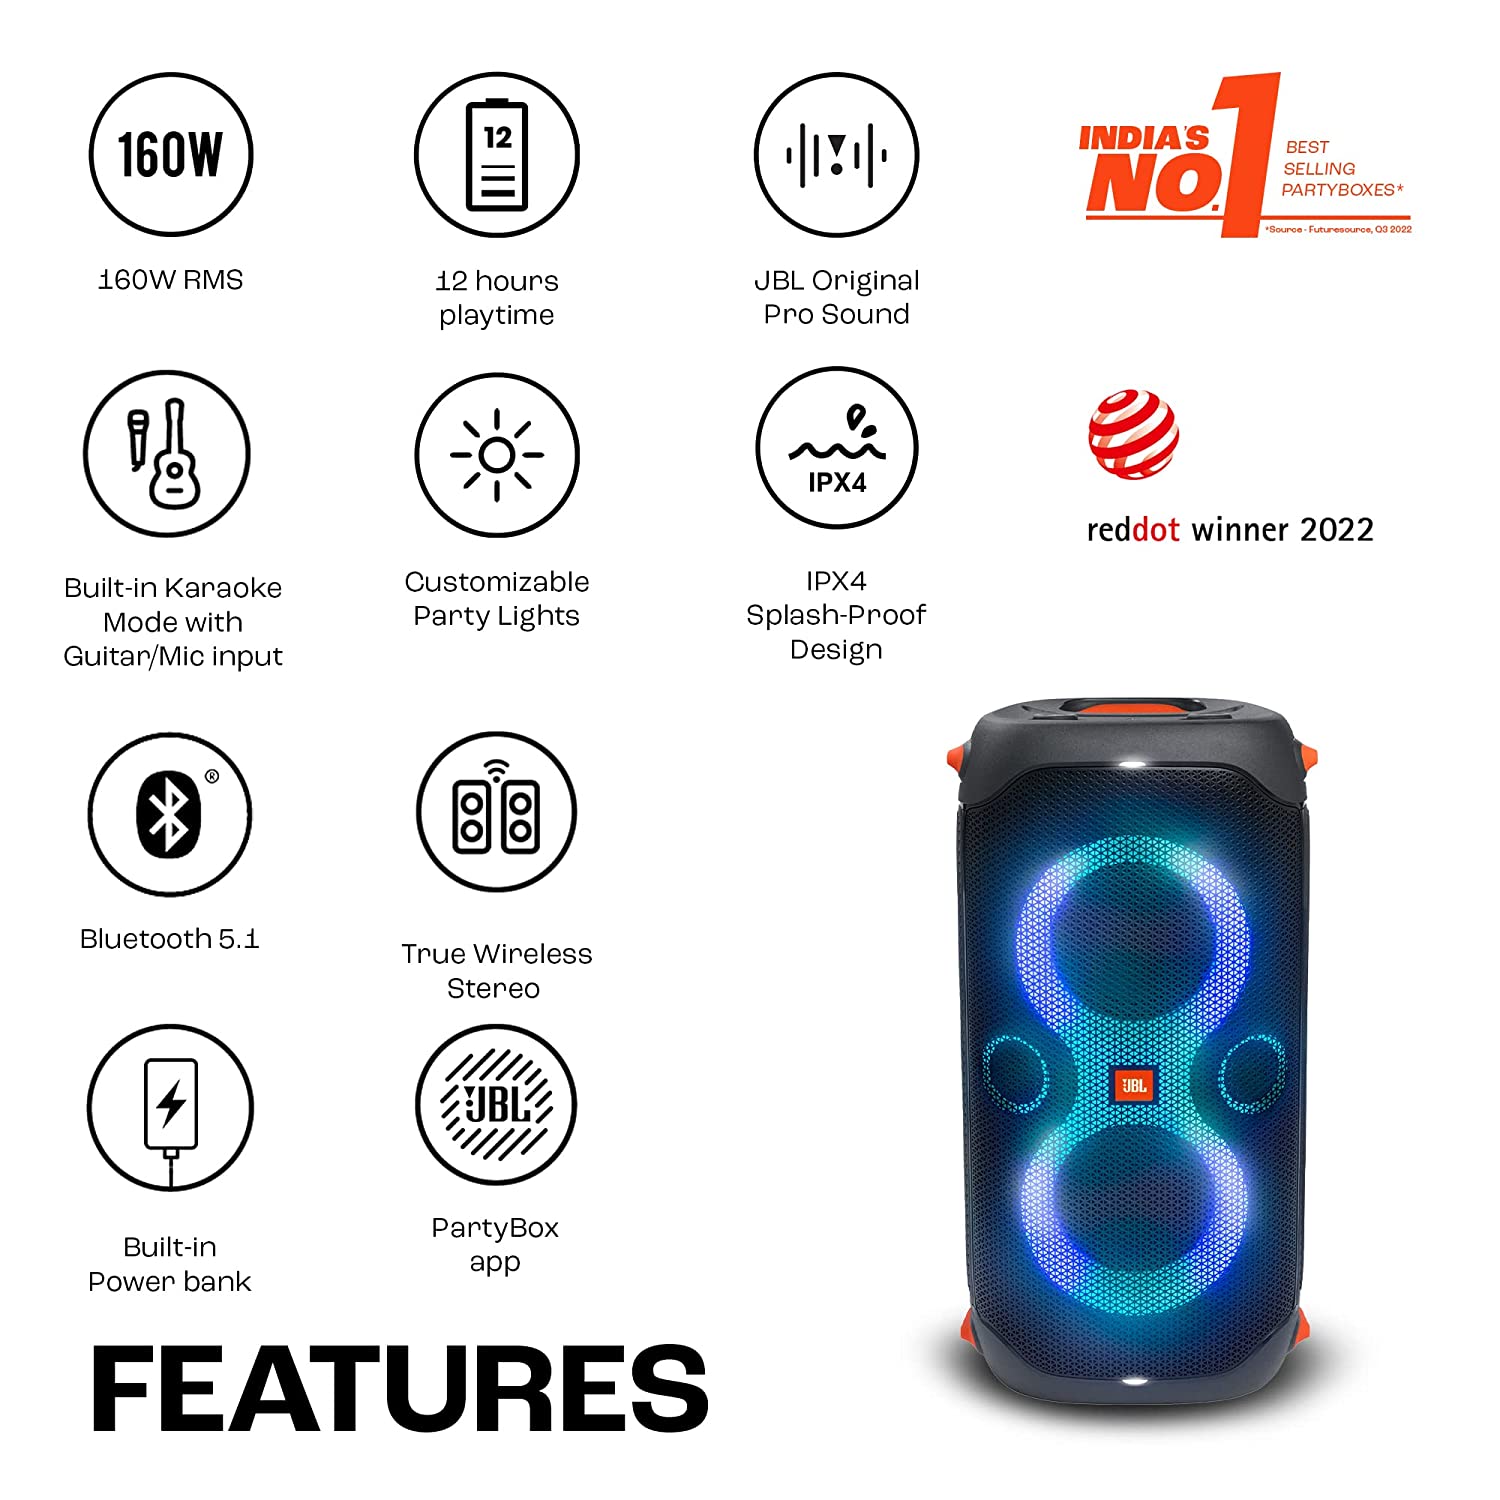 JBL PartyBox 110 - Portable Party Speaker with Built-in Lights, Powerful  Sound and deep bass, Black